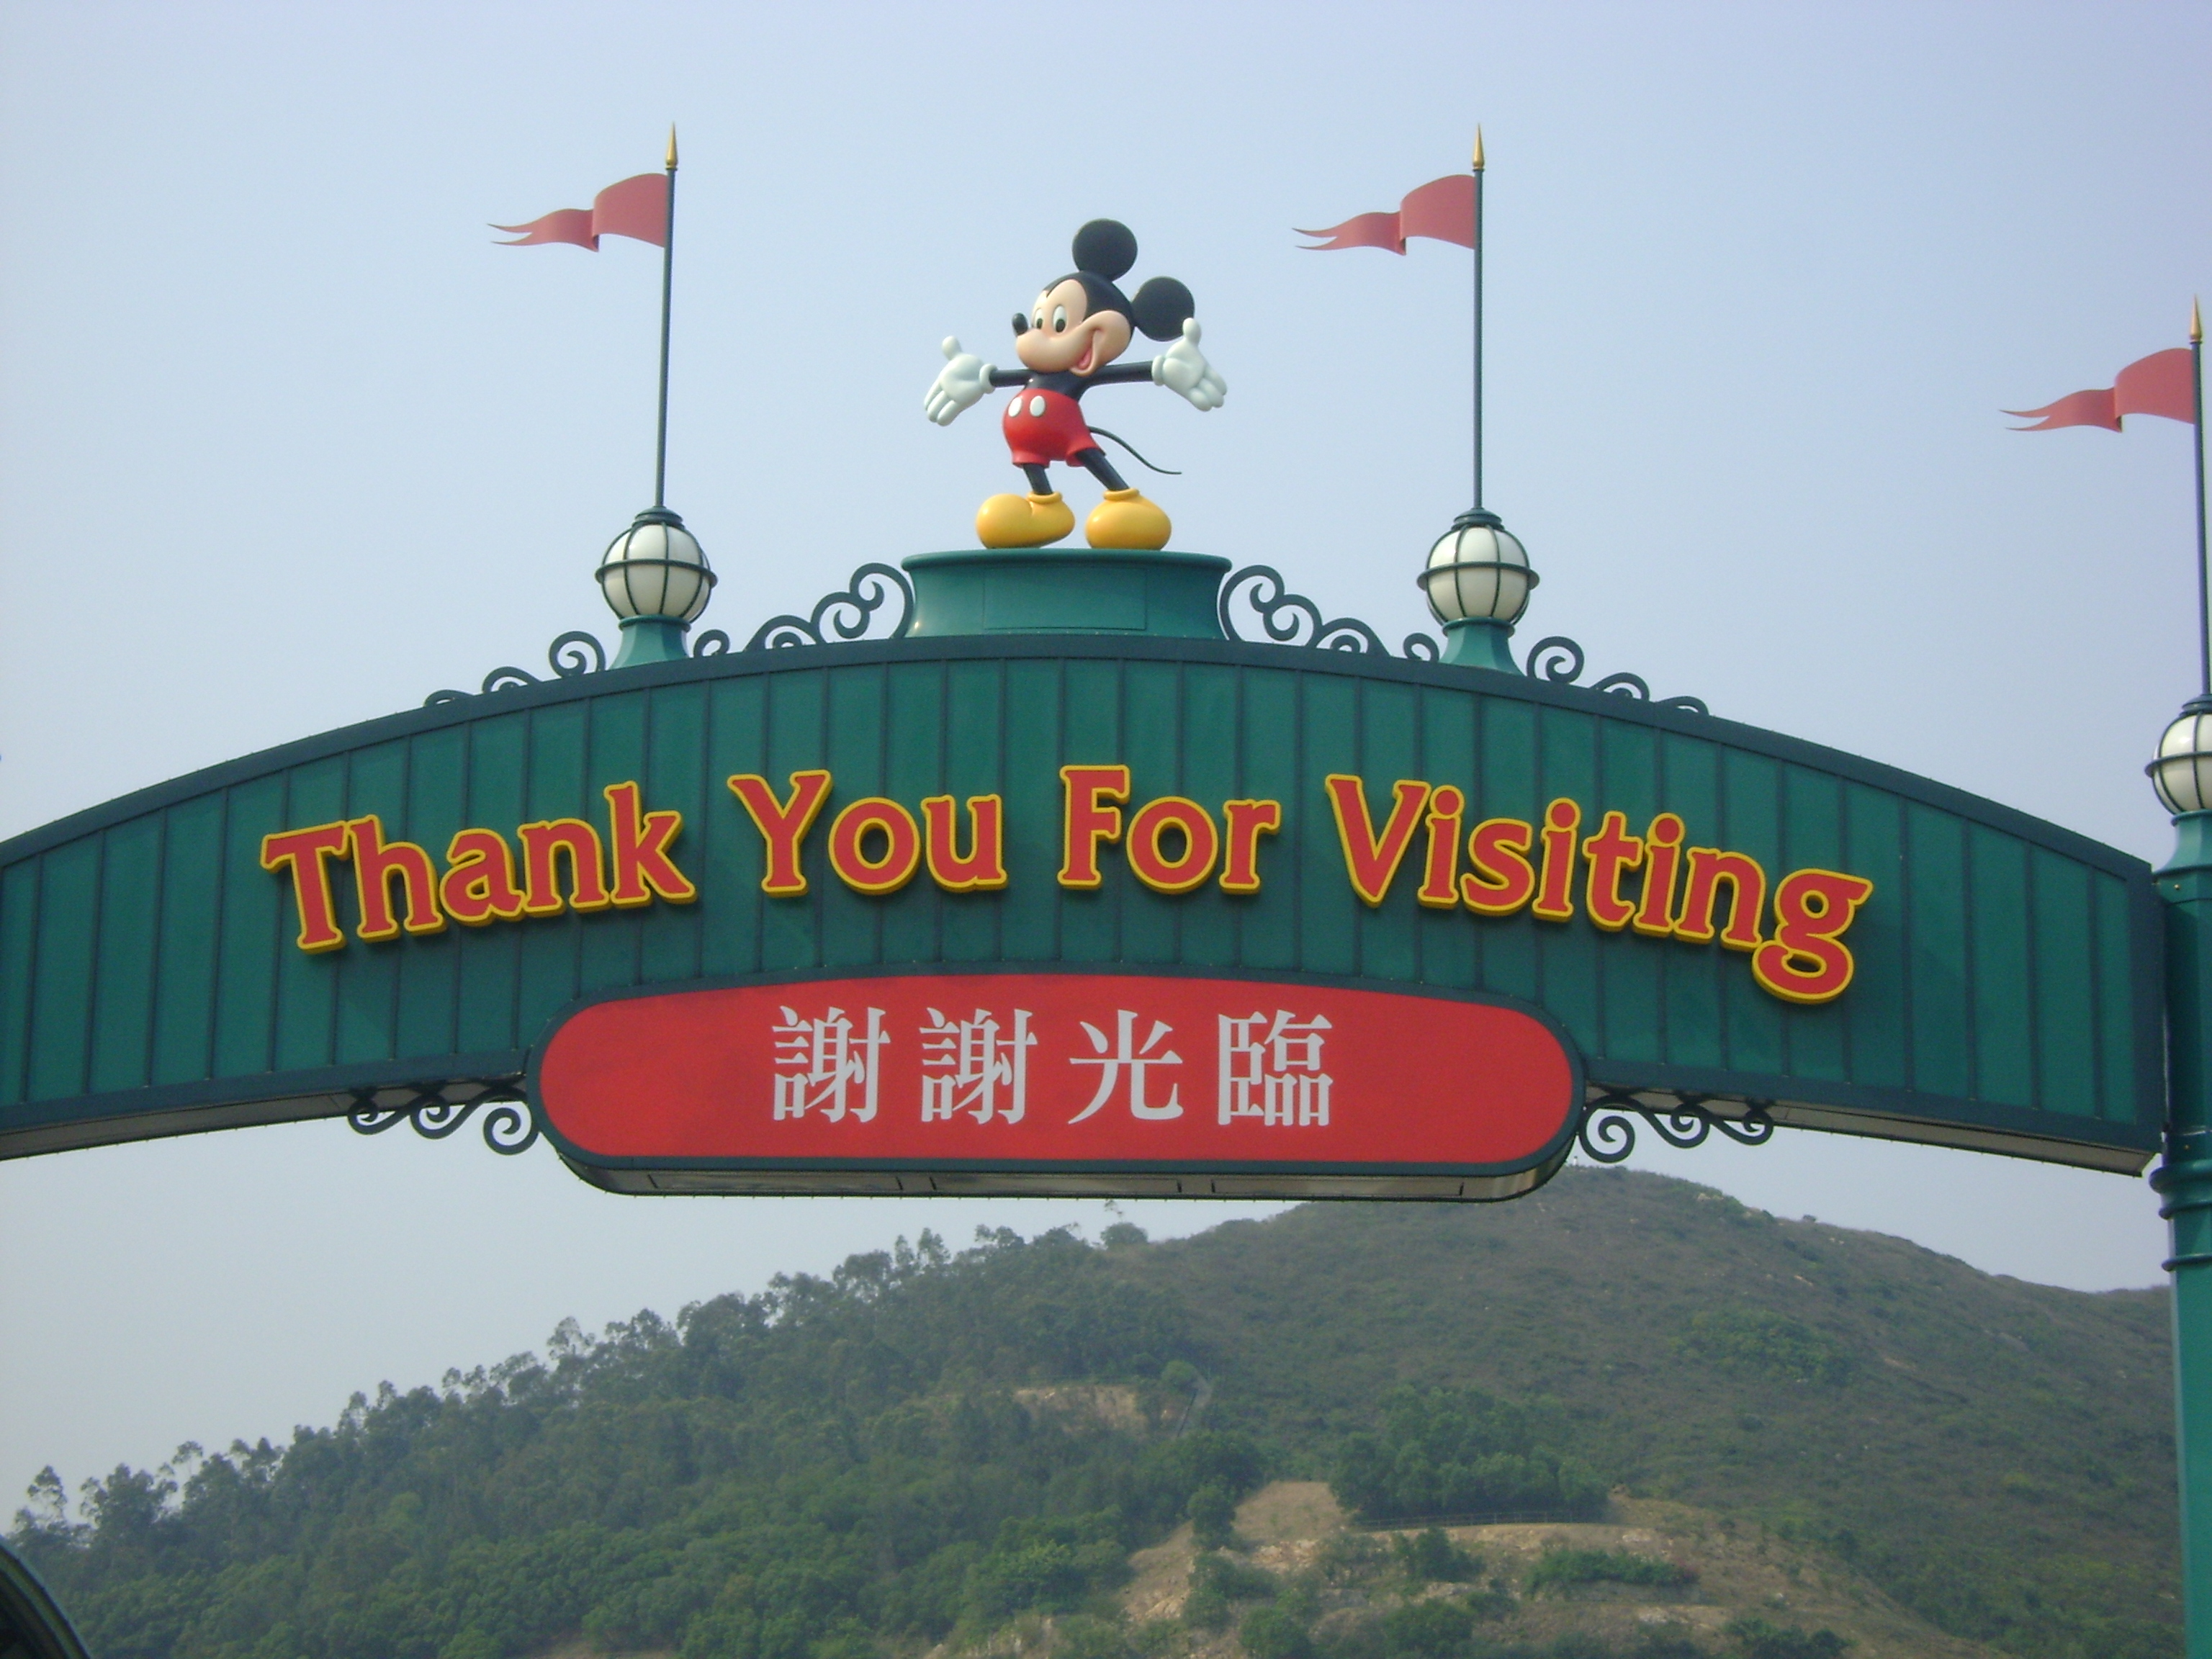 Thank you for Visiting Disneyland sign